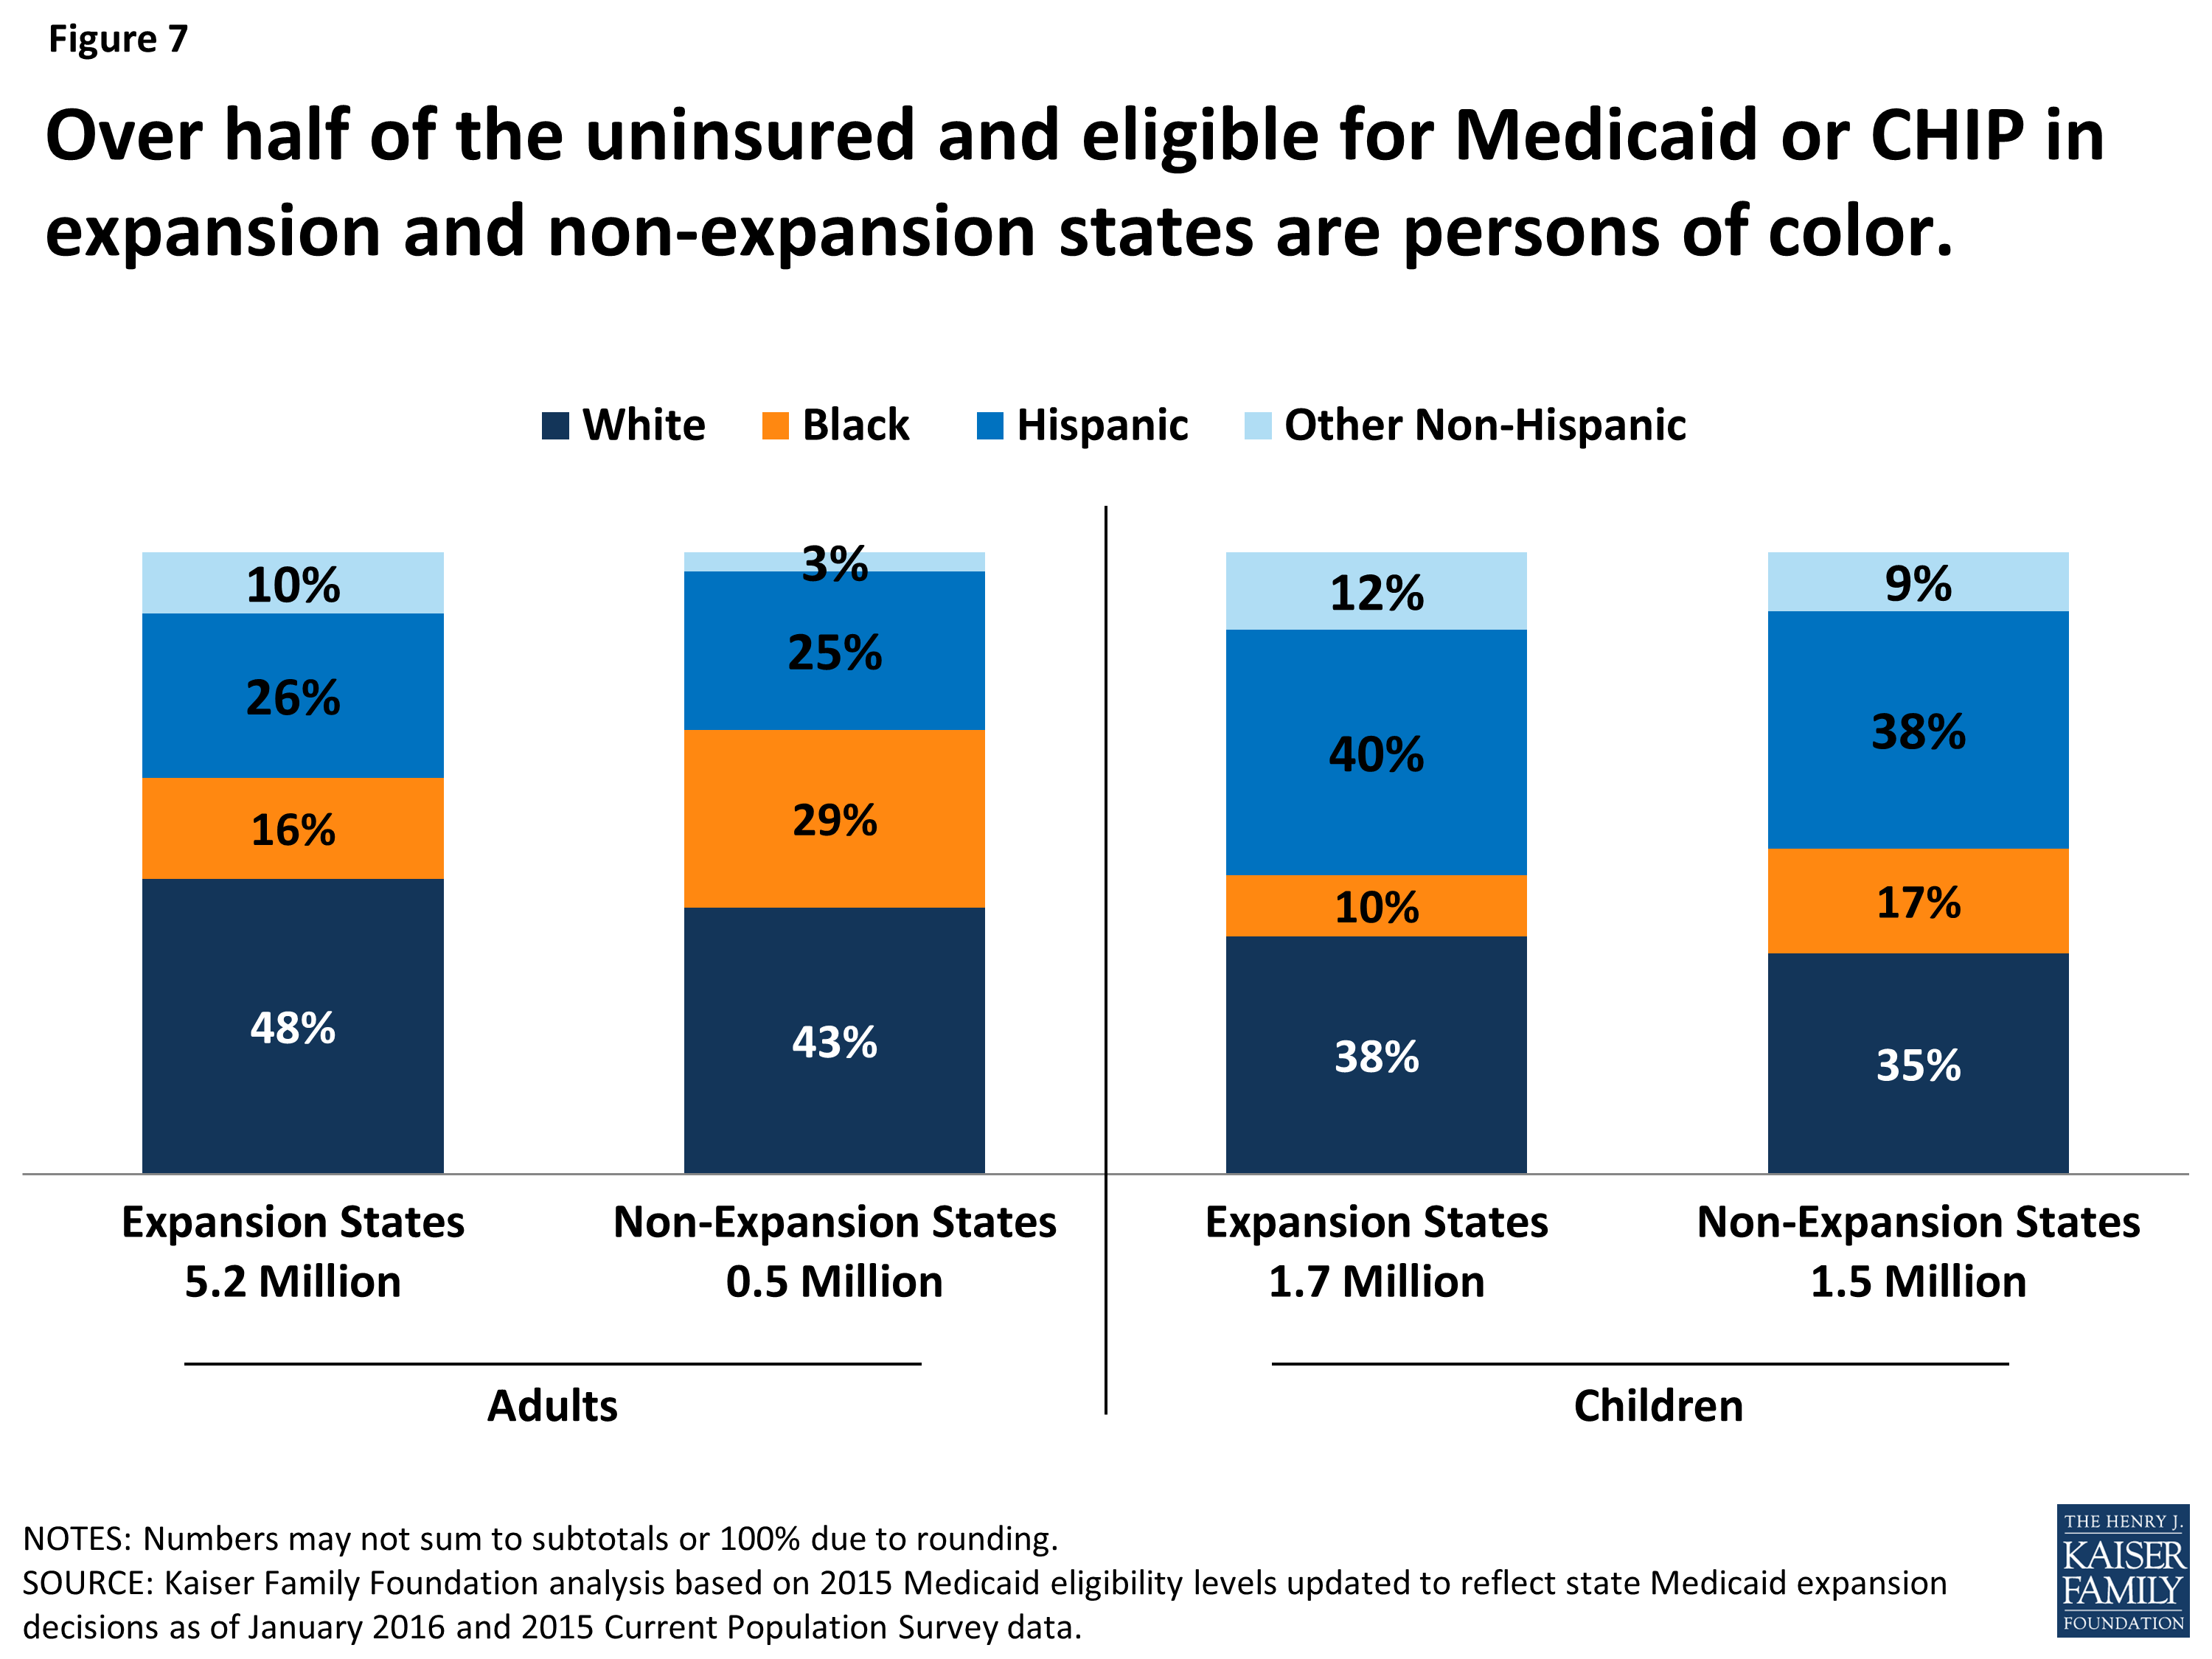 A Closer Look At The Remaining Uninsured Population Eligible For